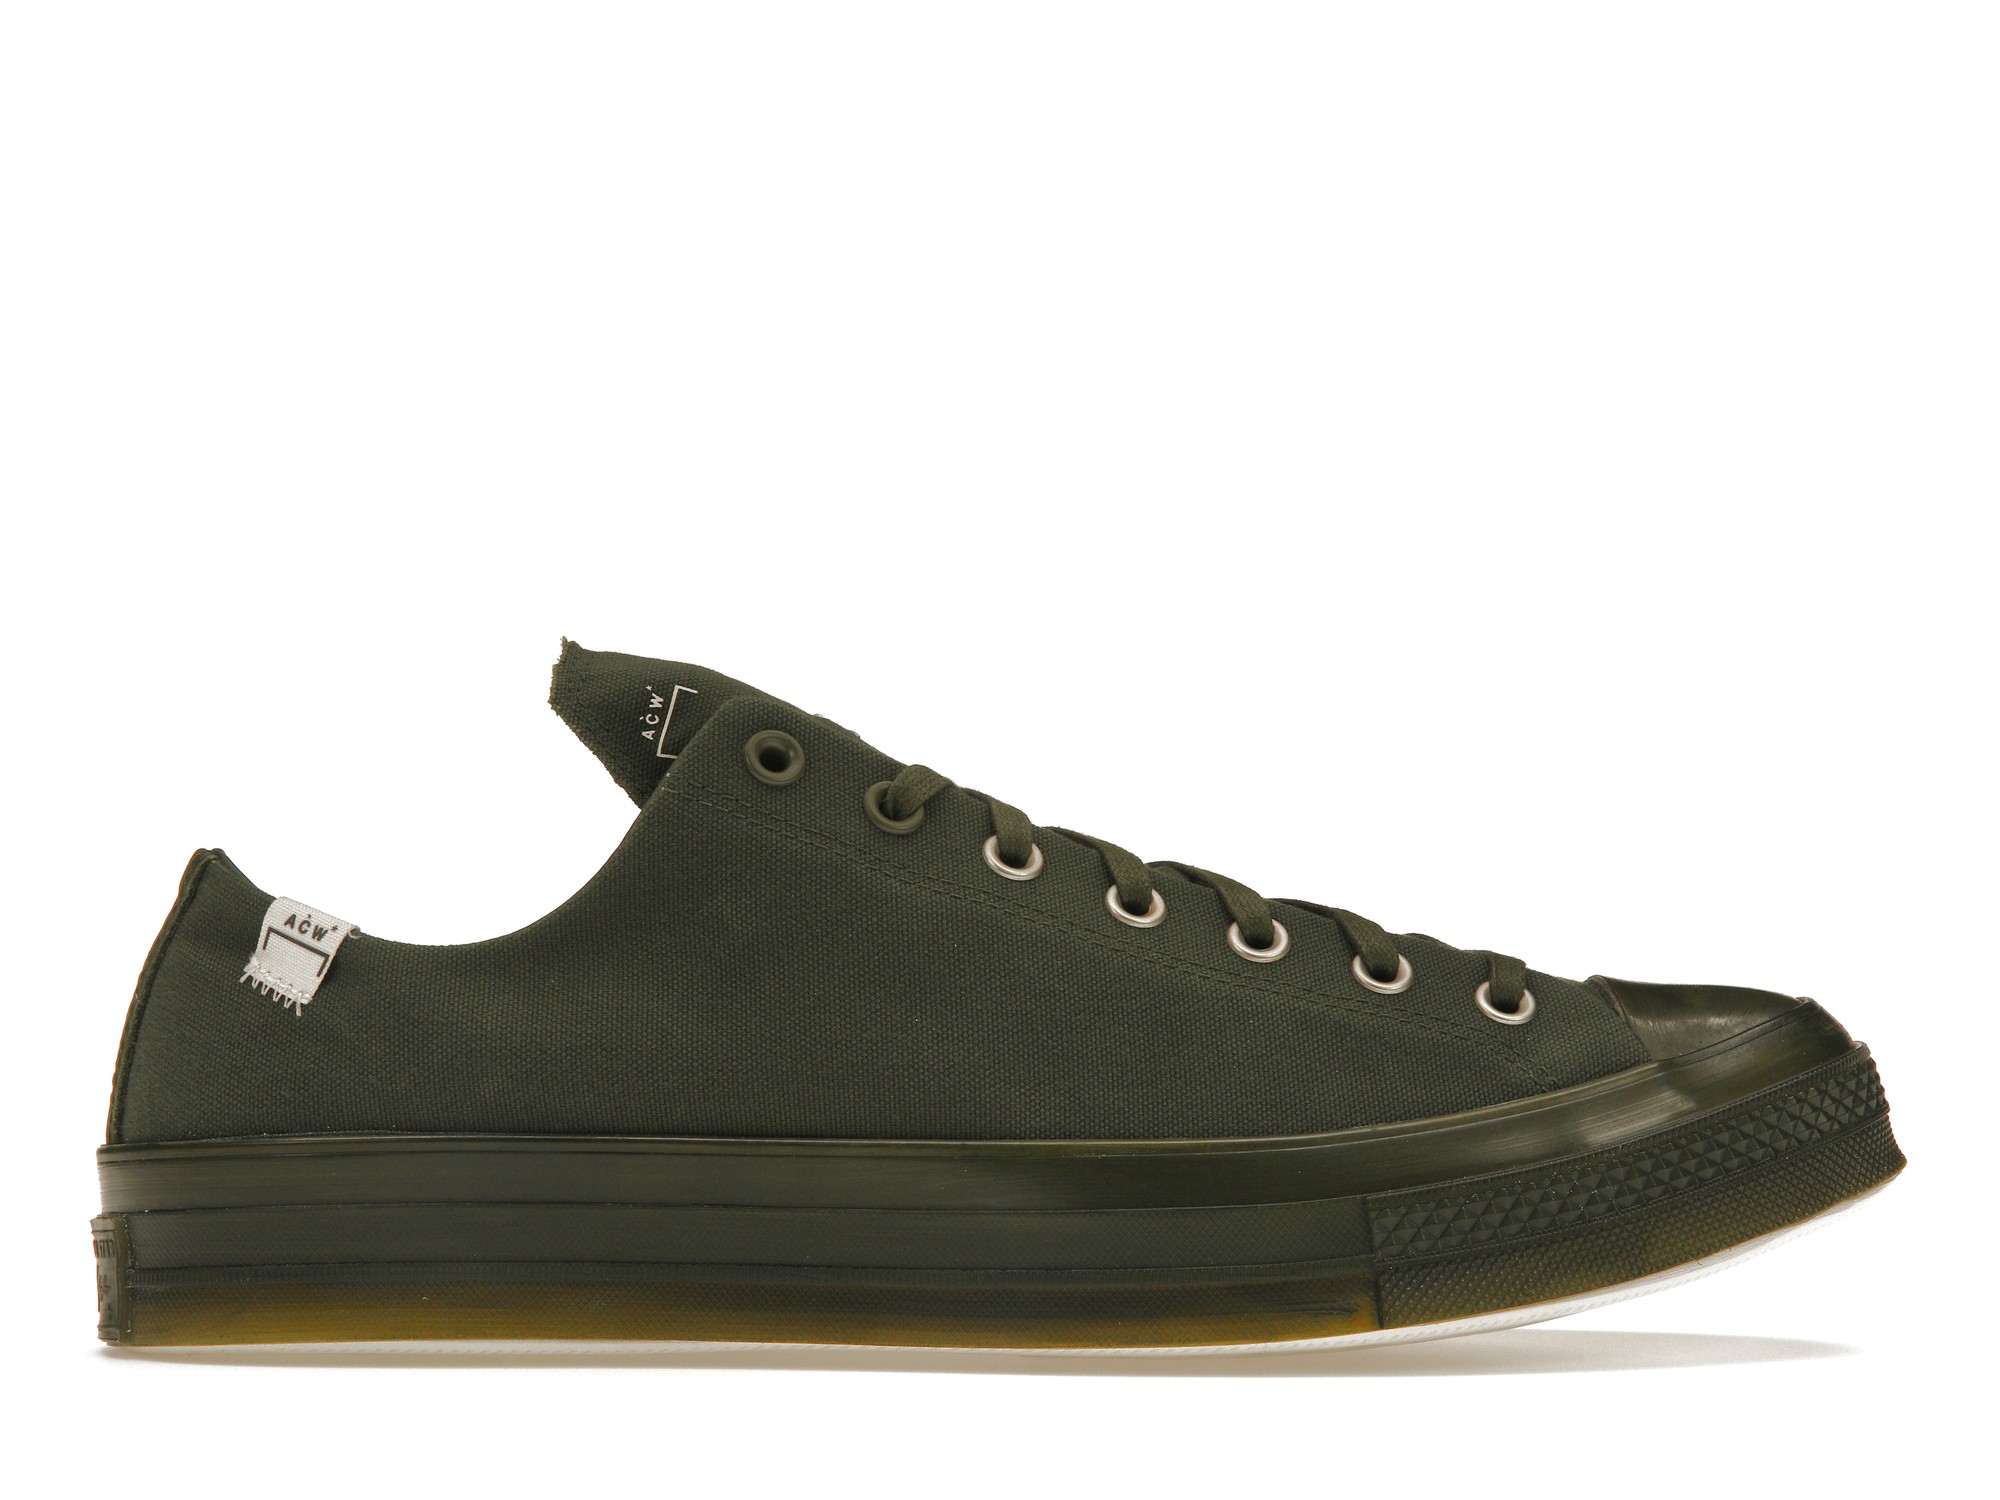 Converse Chuck Taylor All Star 70 Ox A-COLD-WALL Green